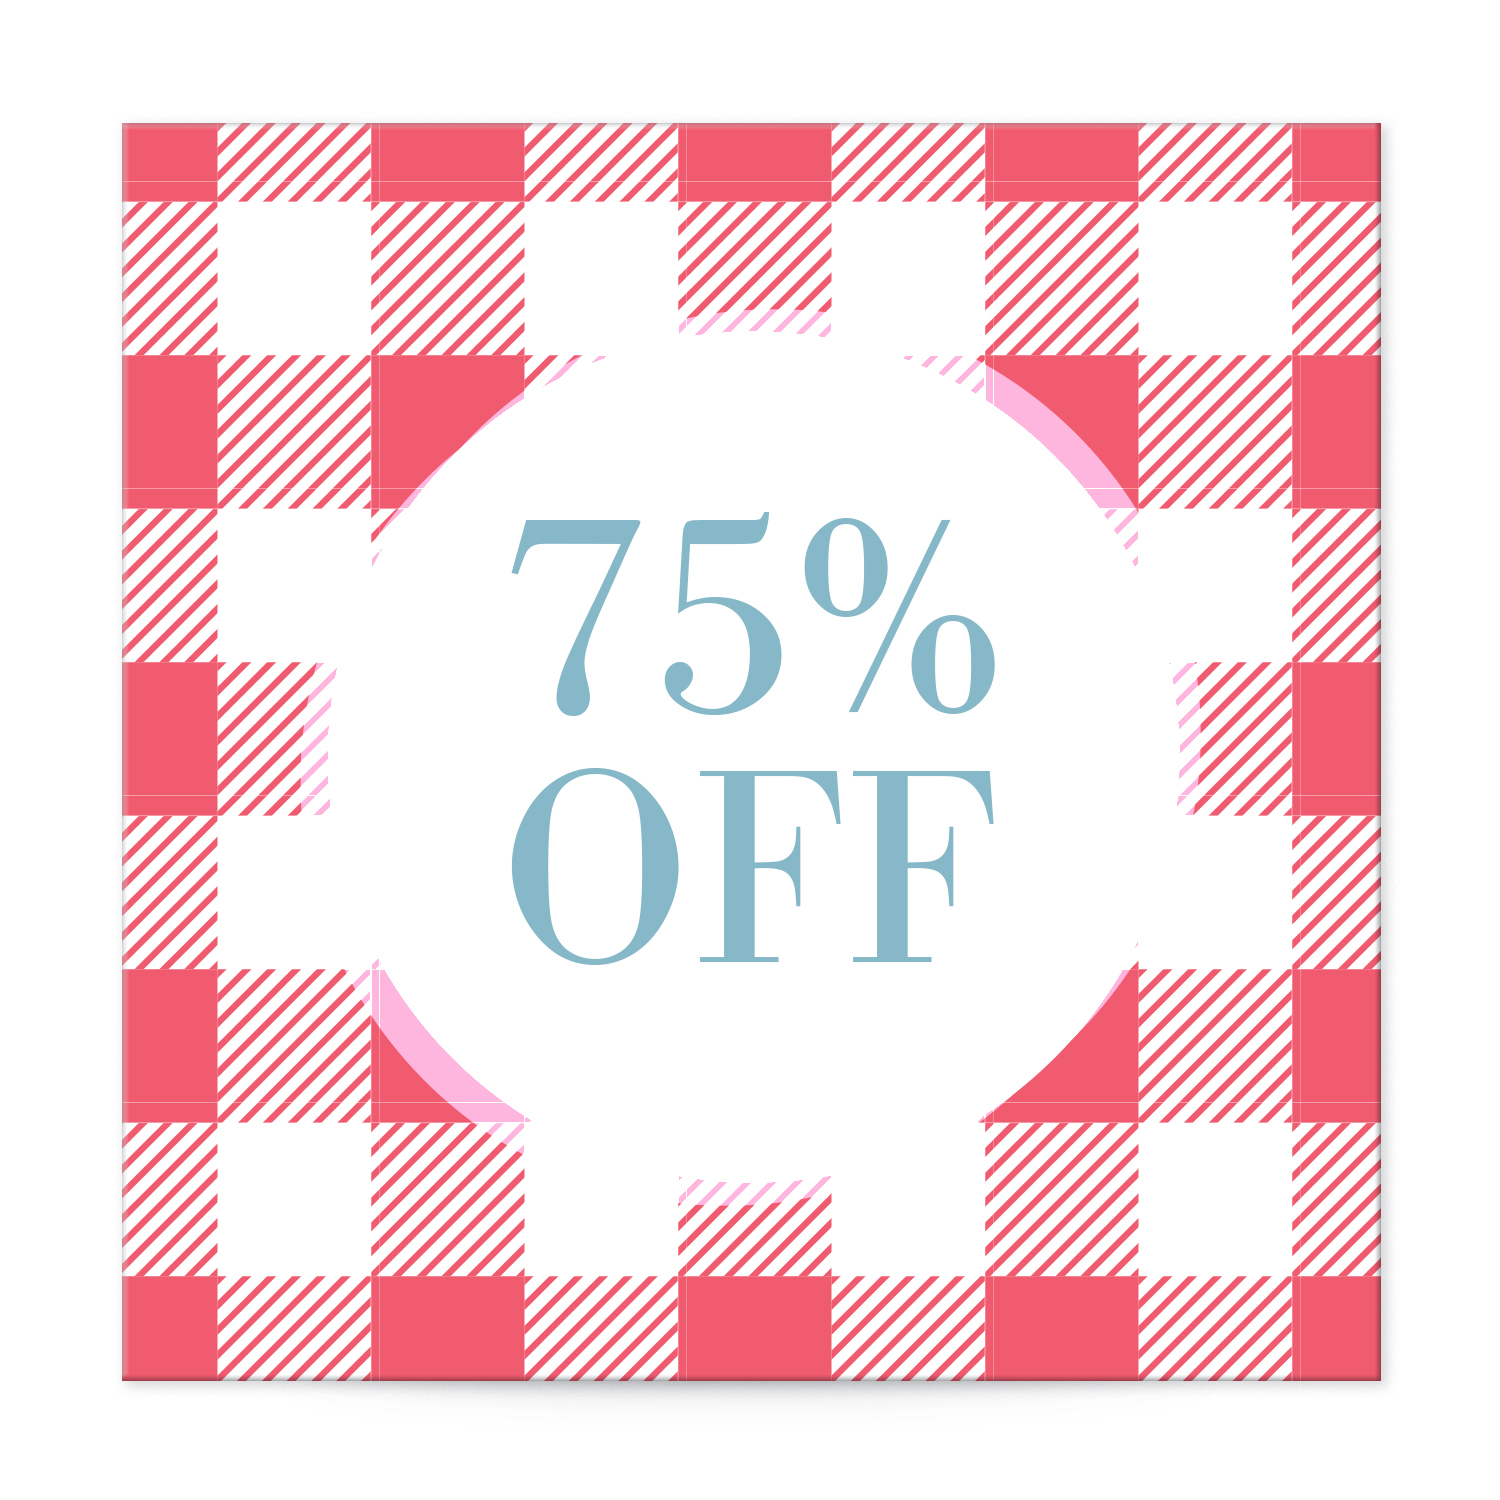 Gingham tablecloth print square label templates